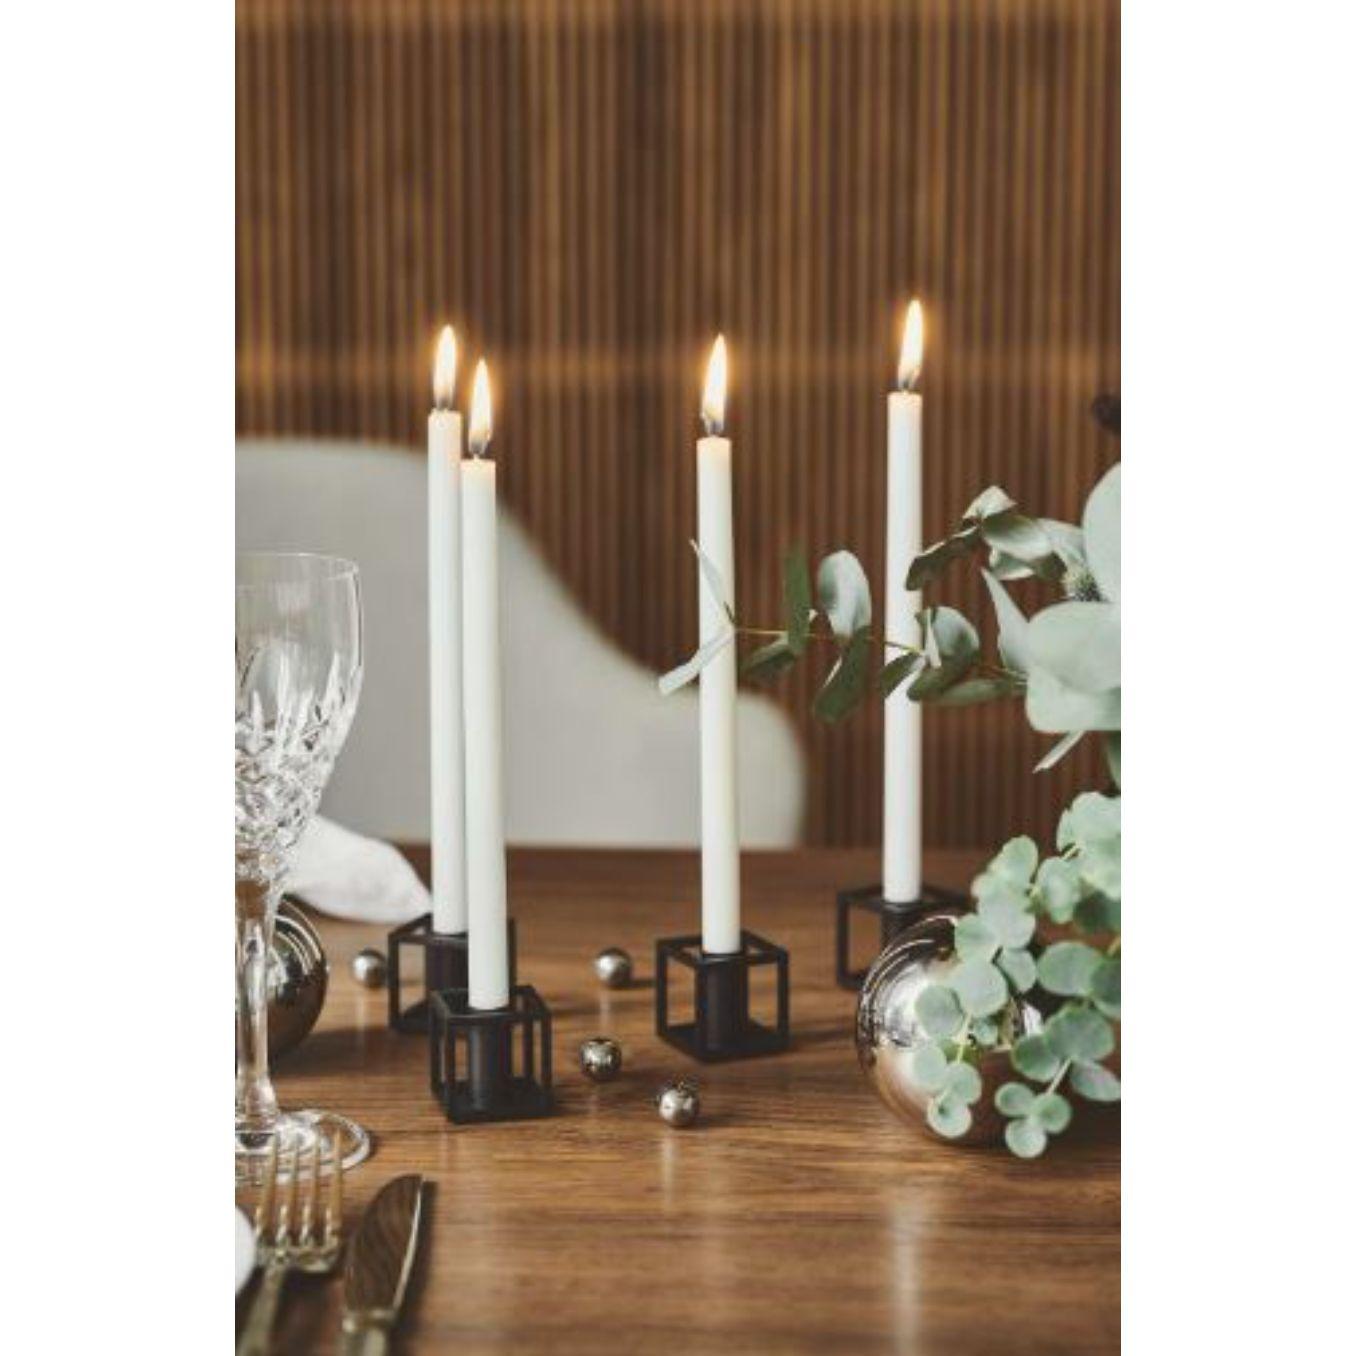 Set of 4 Black Kubus 1 Candle Holders by Lassen For Sale 5